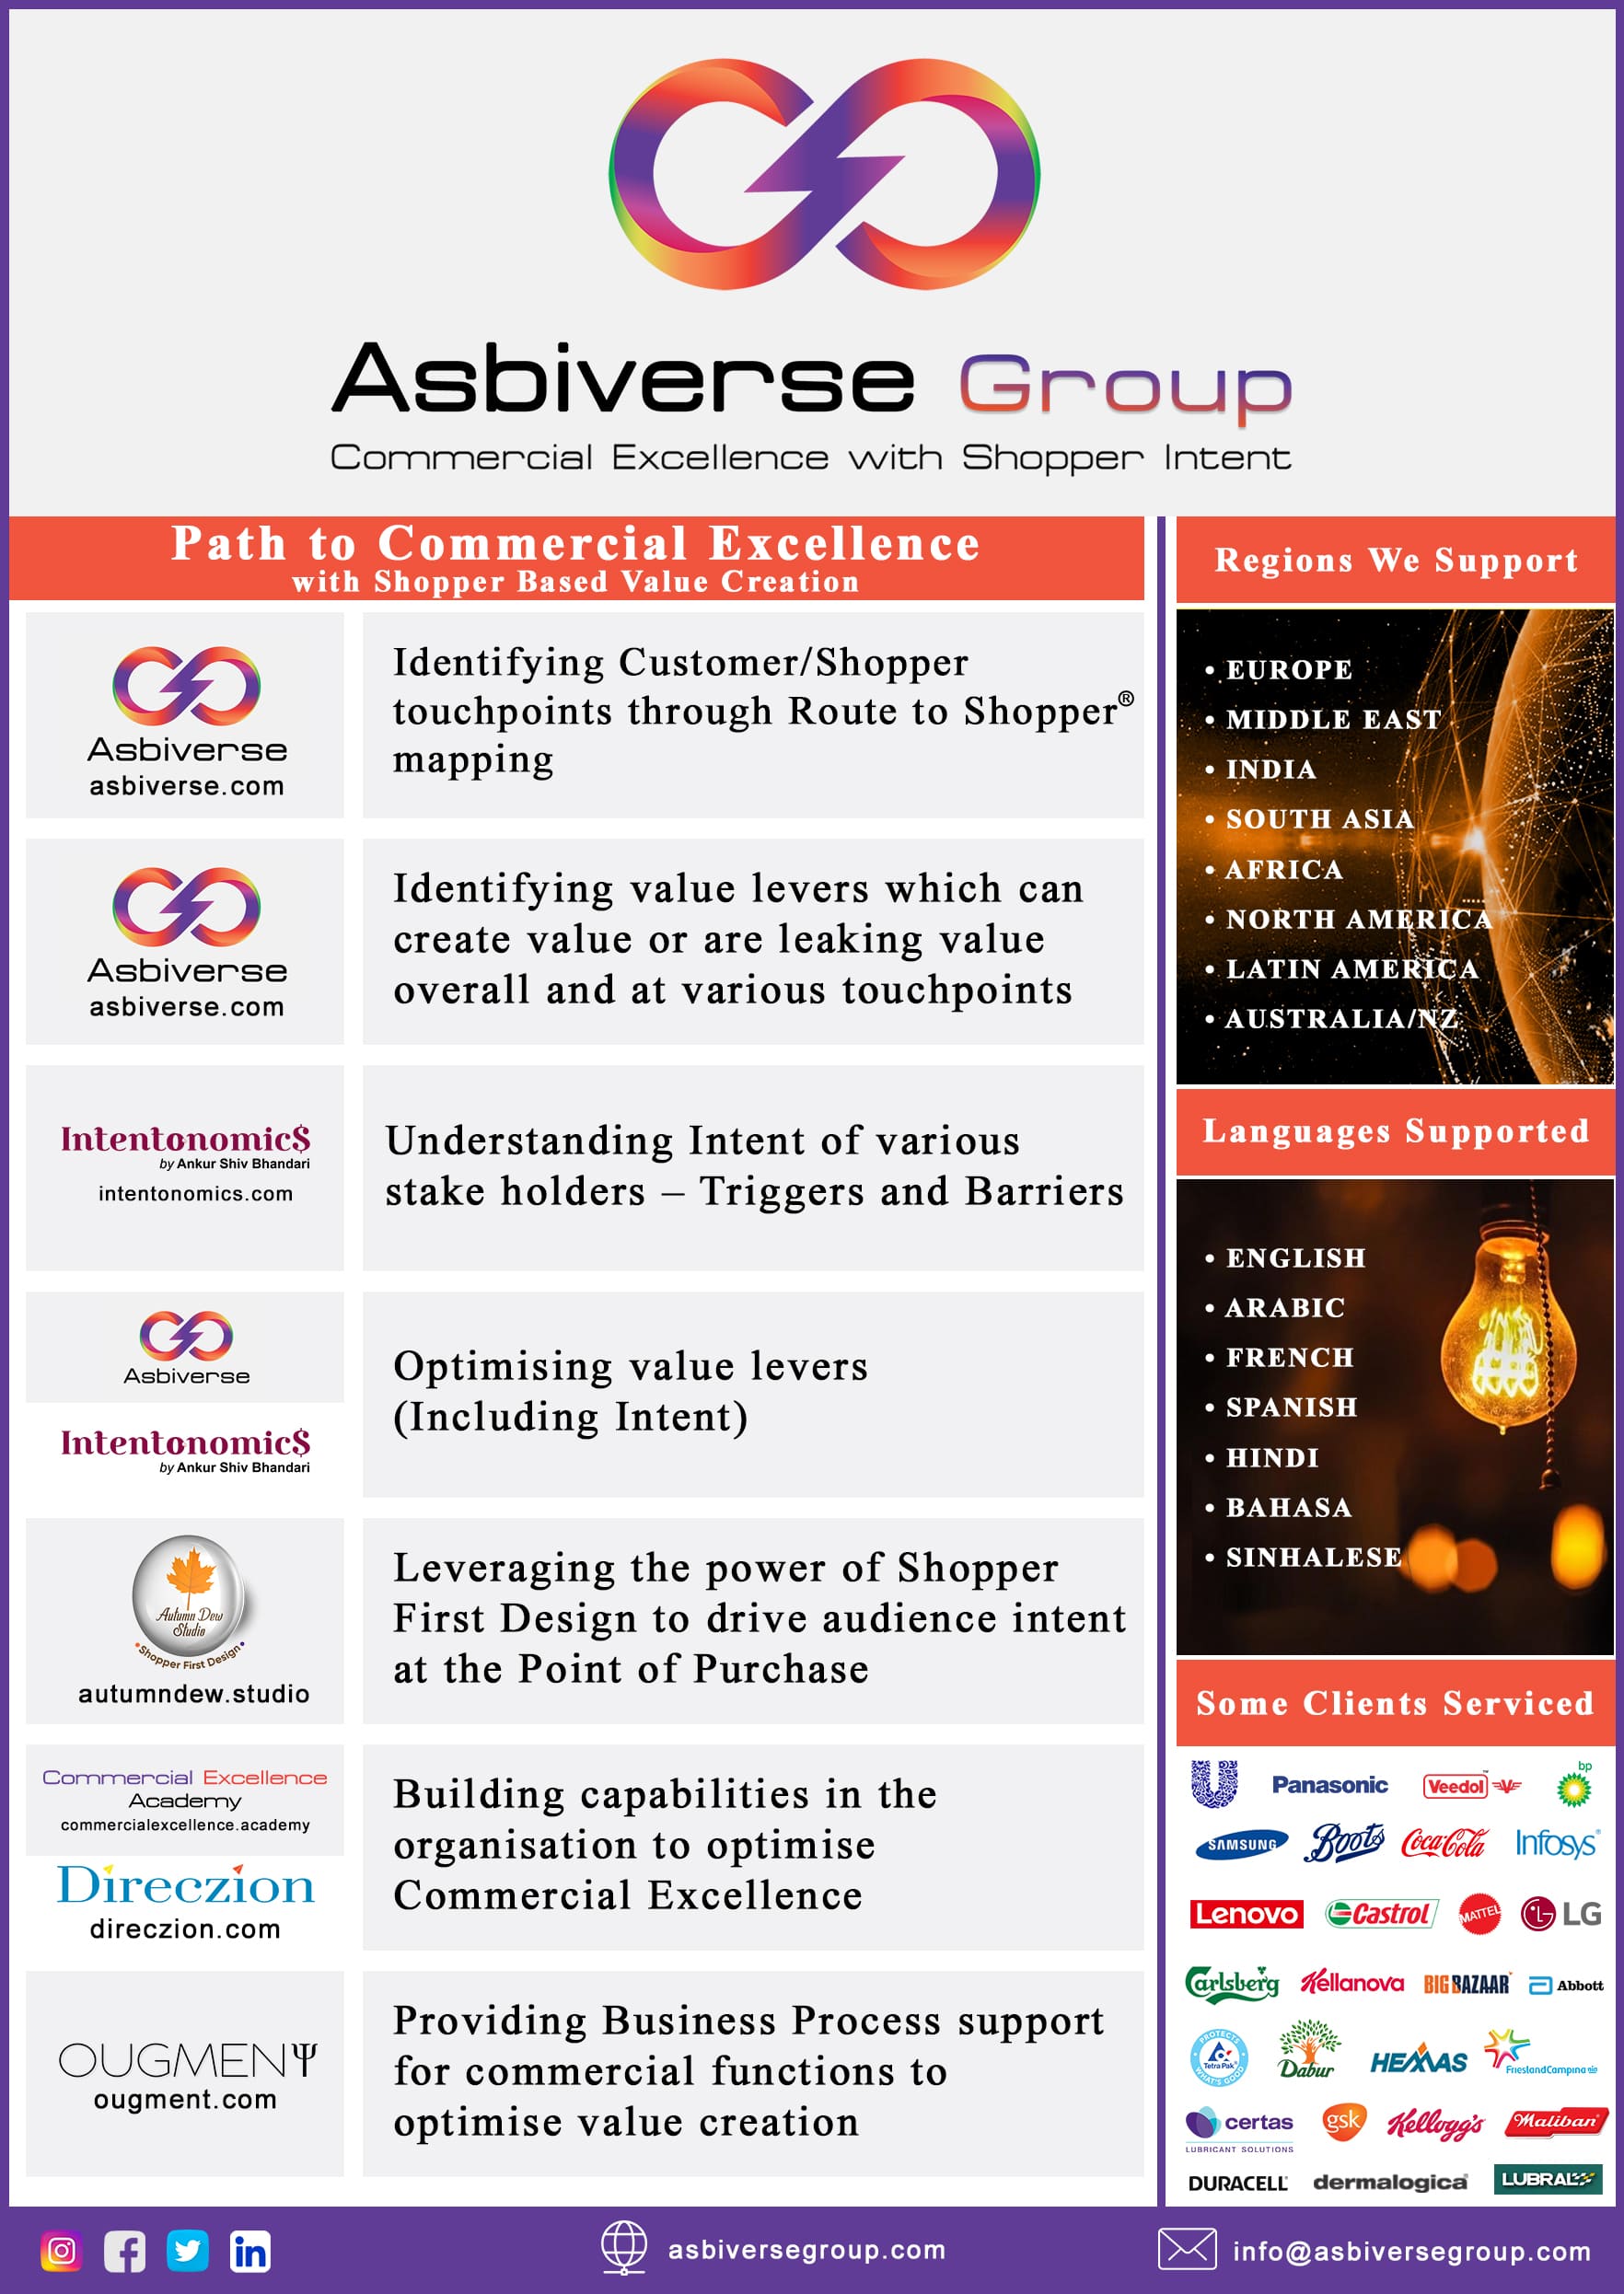 Asbiverse Group Summary of Services